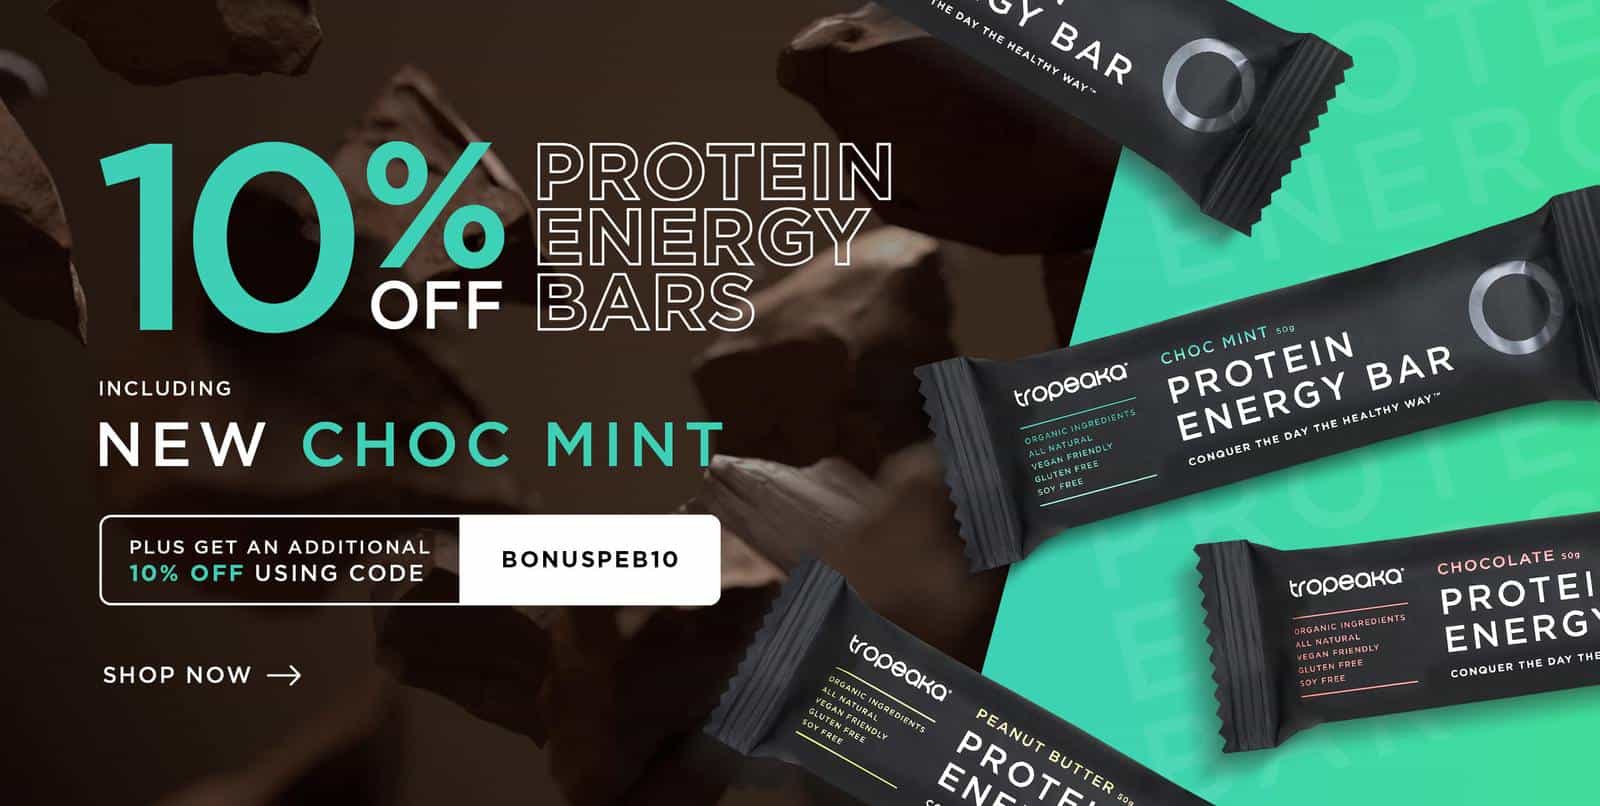 Extra 10% OFF Protein Energy Bars with promo code